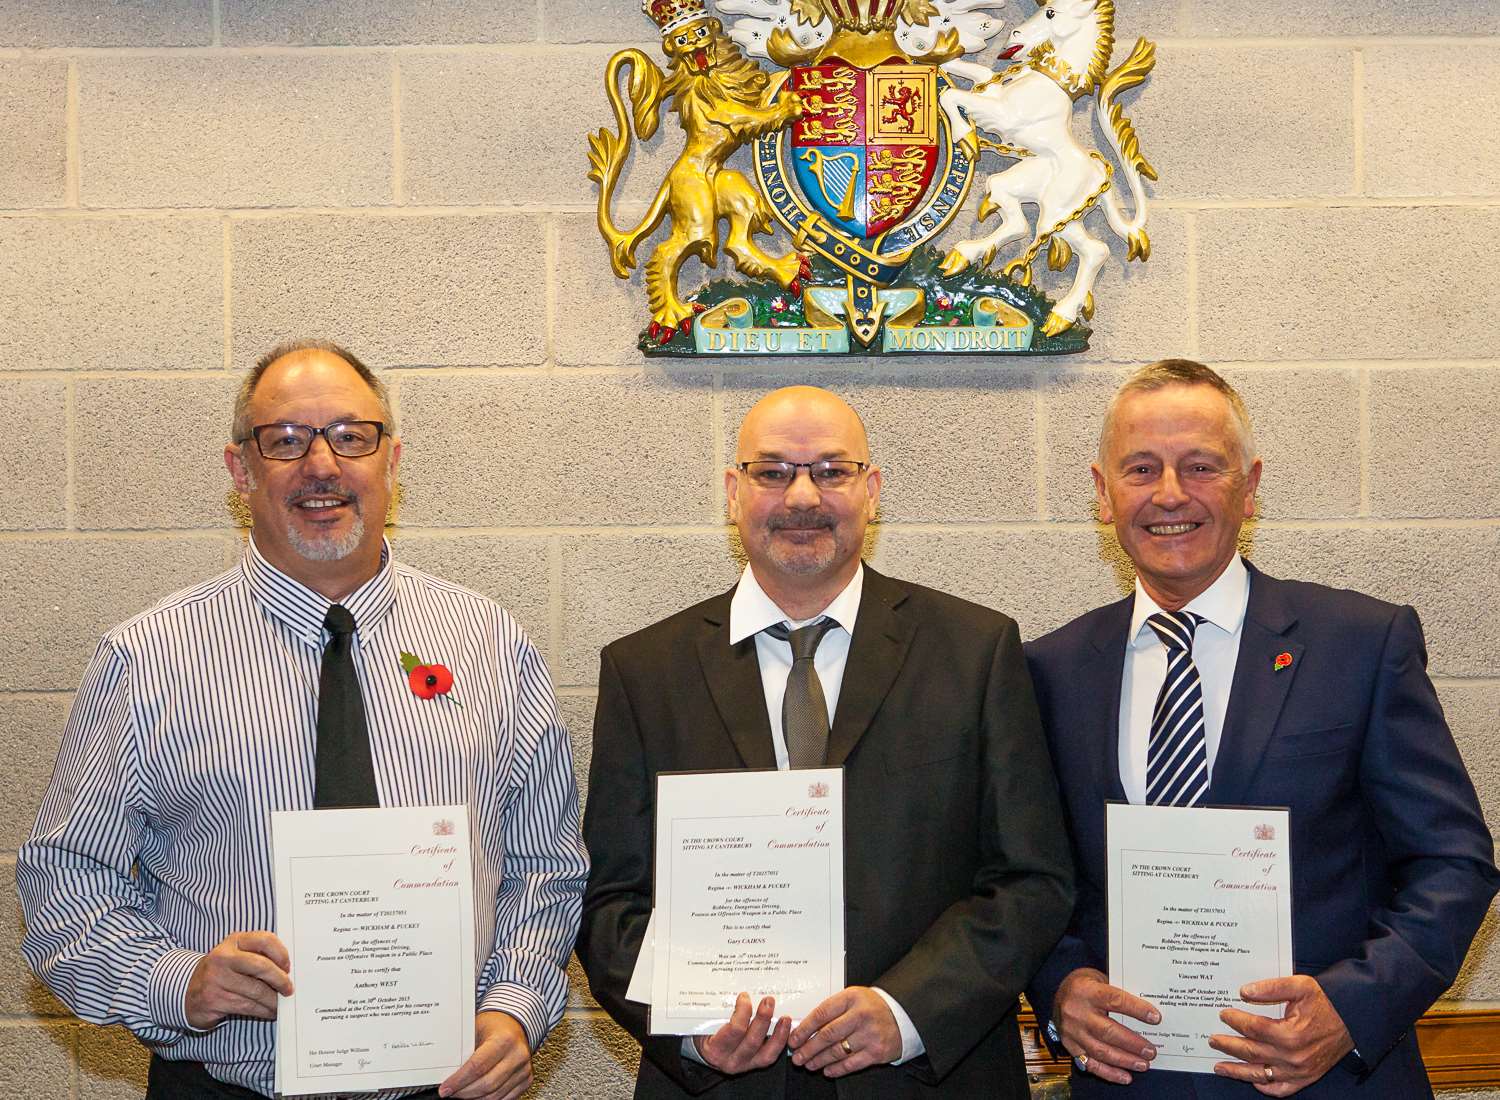 Anthony West, Gary Cairns and Vincent Way have been presented with bravery awards